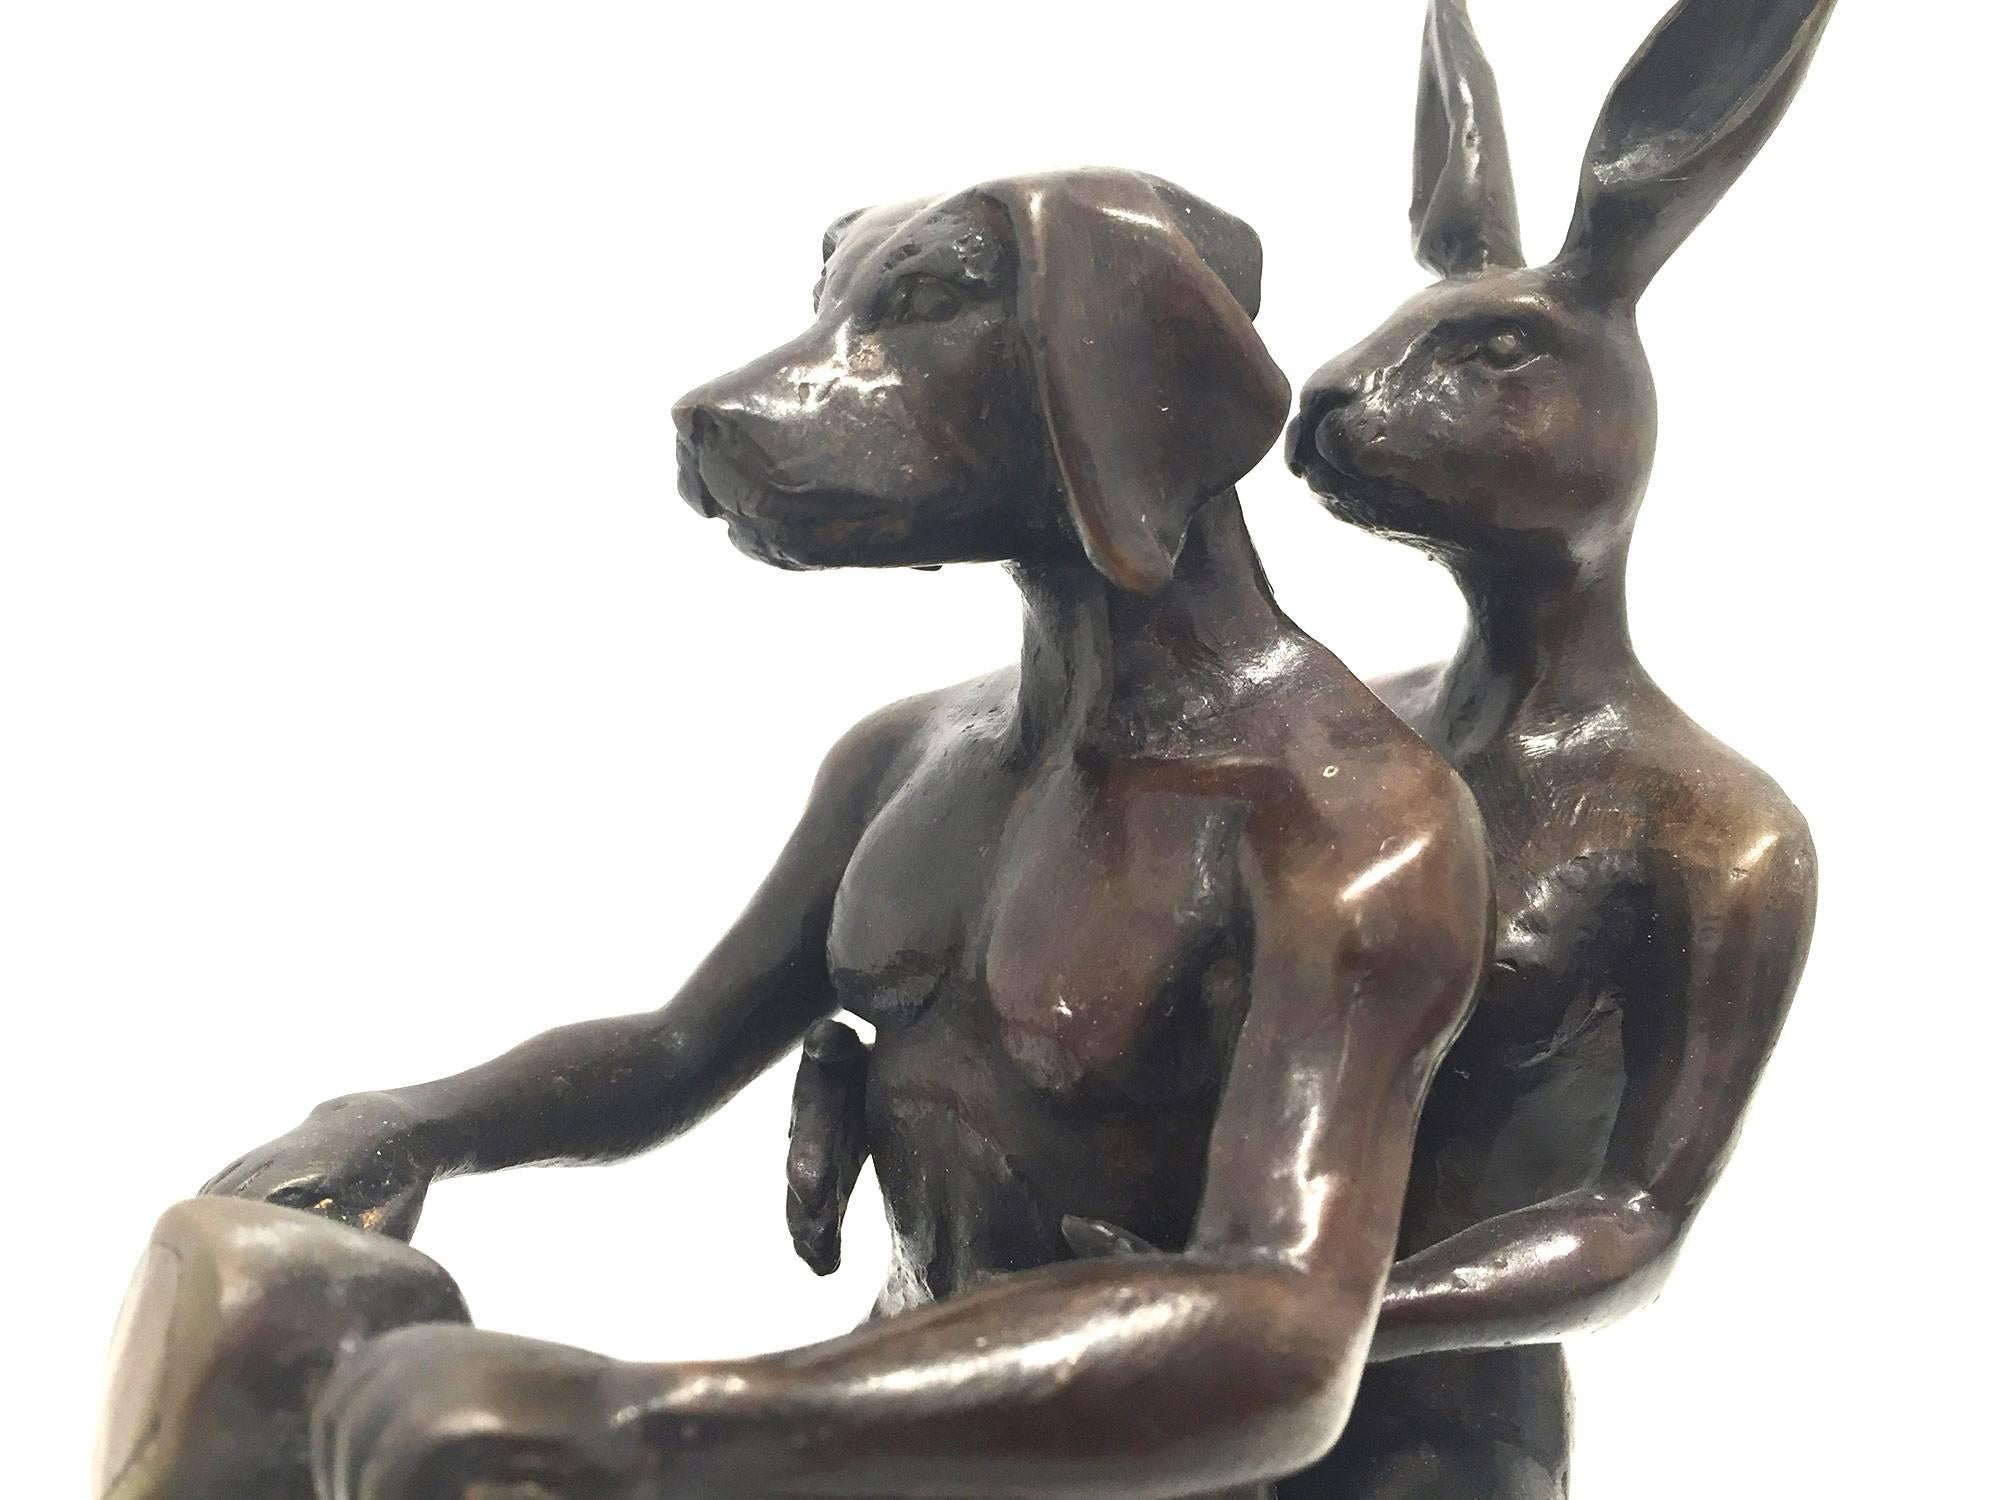 A whimsical yet very strong piece depicting the two figures from Gillie and Marc's iconic figures of the Dog/Bunny Human Hybrid, which has picked up much esteem across the globe. Here we find the figures riding on a Vespa as they embrace. This piece